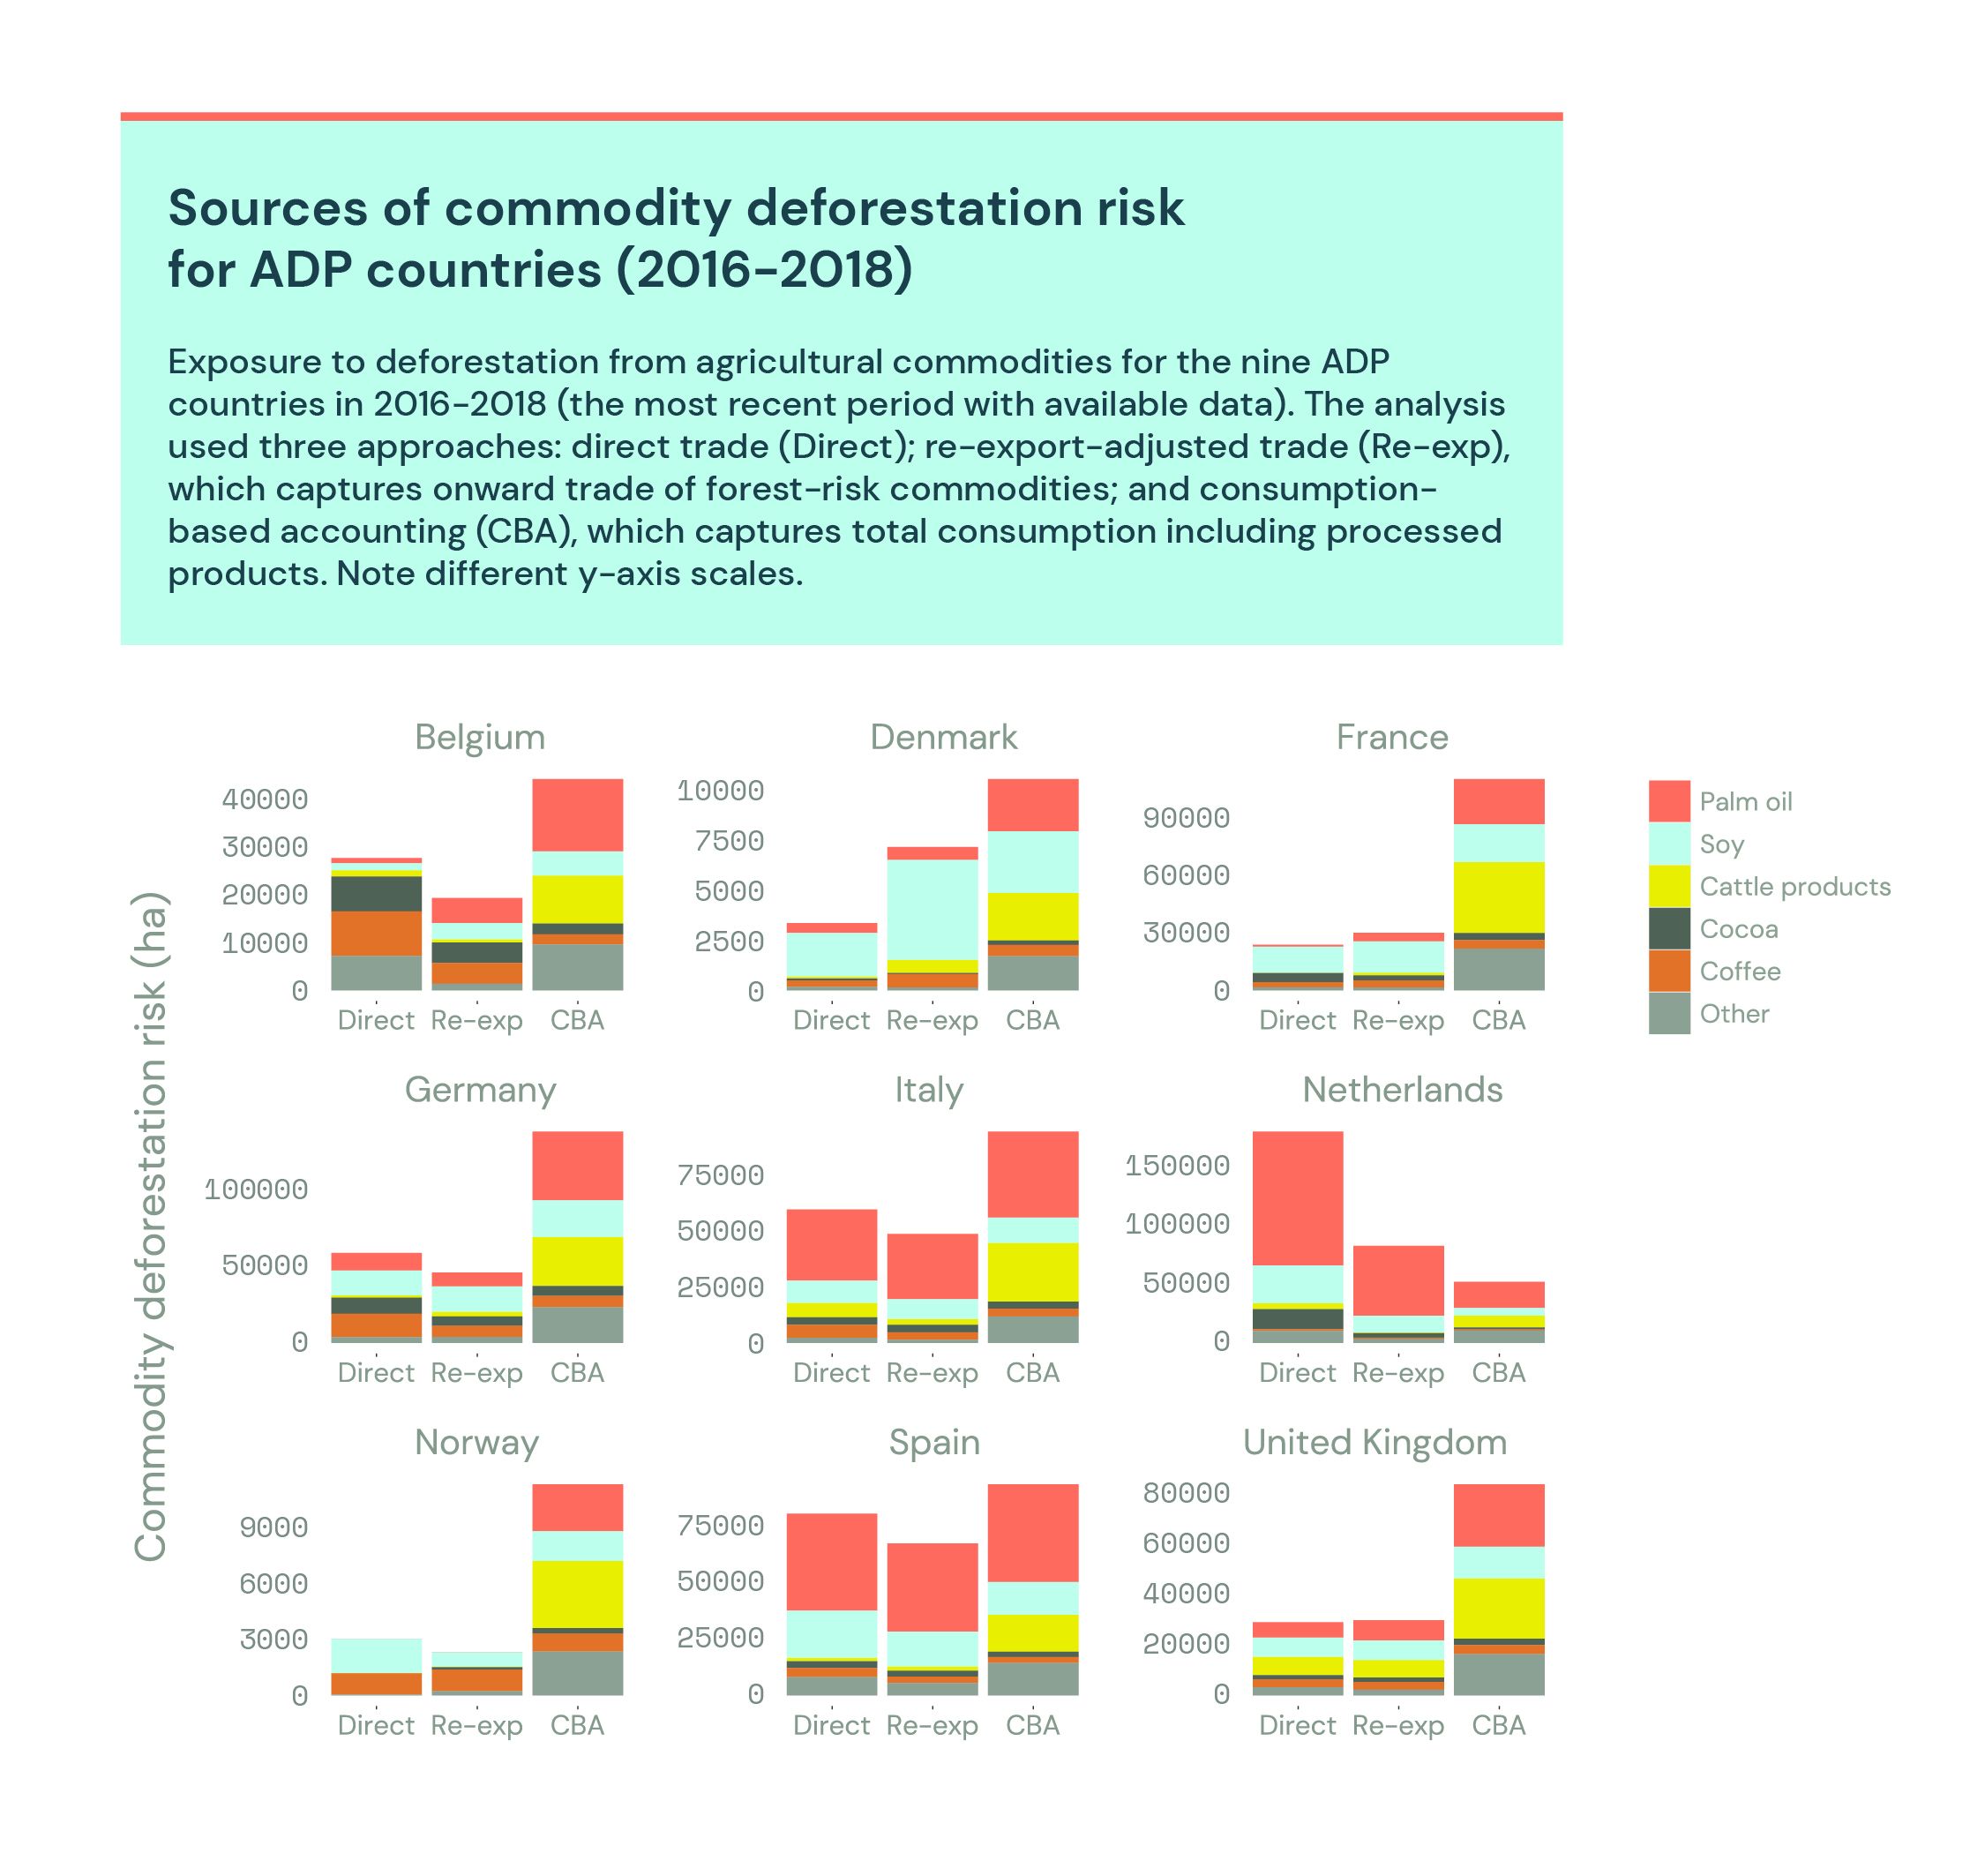 Bar graphs showing sources of commodity deforestation risk for ADP countries